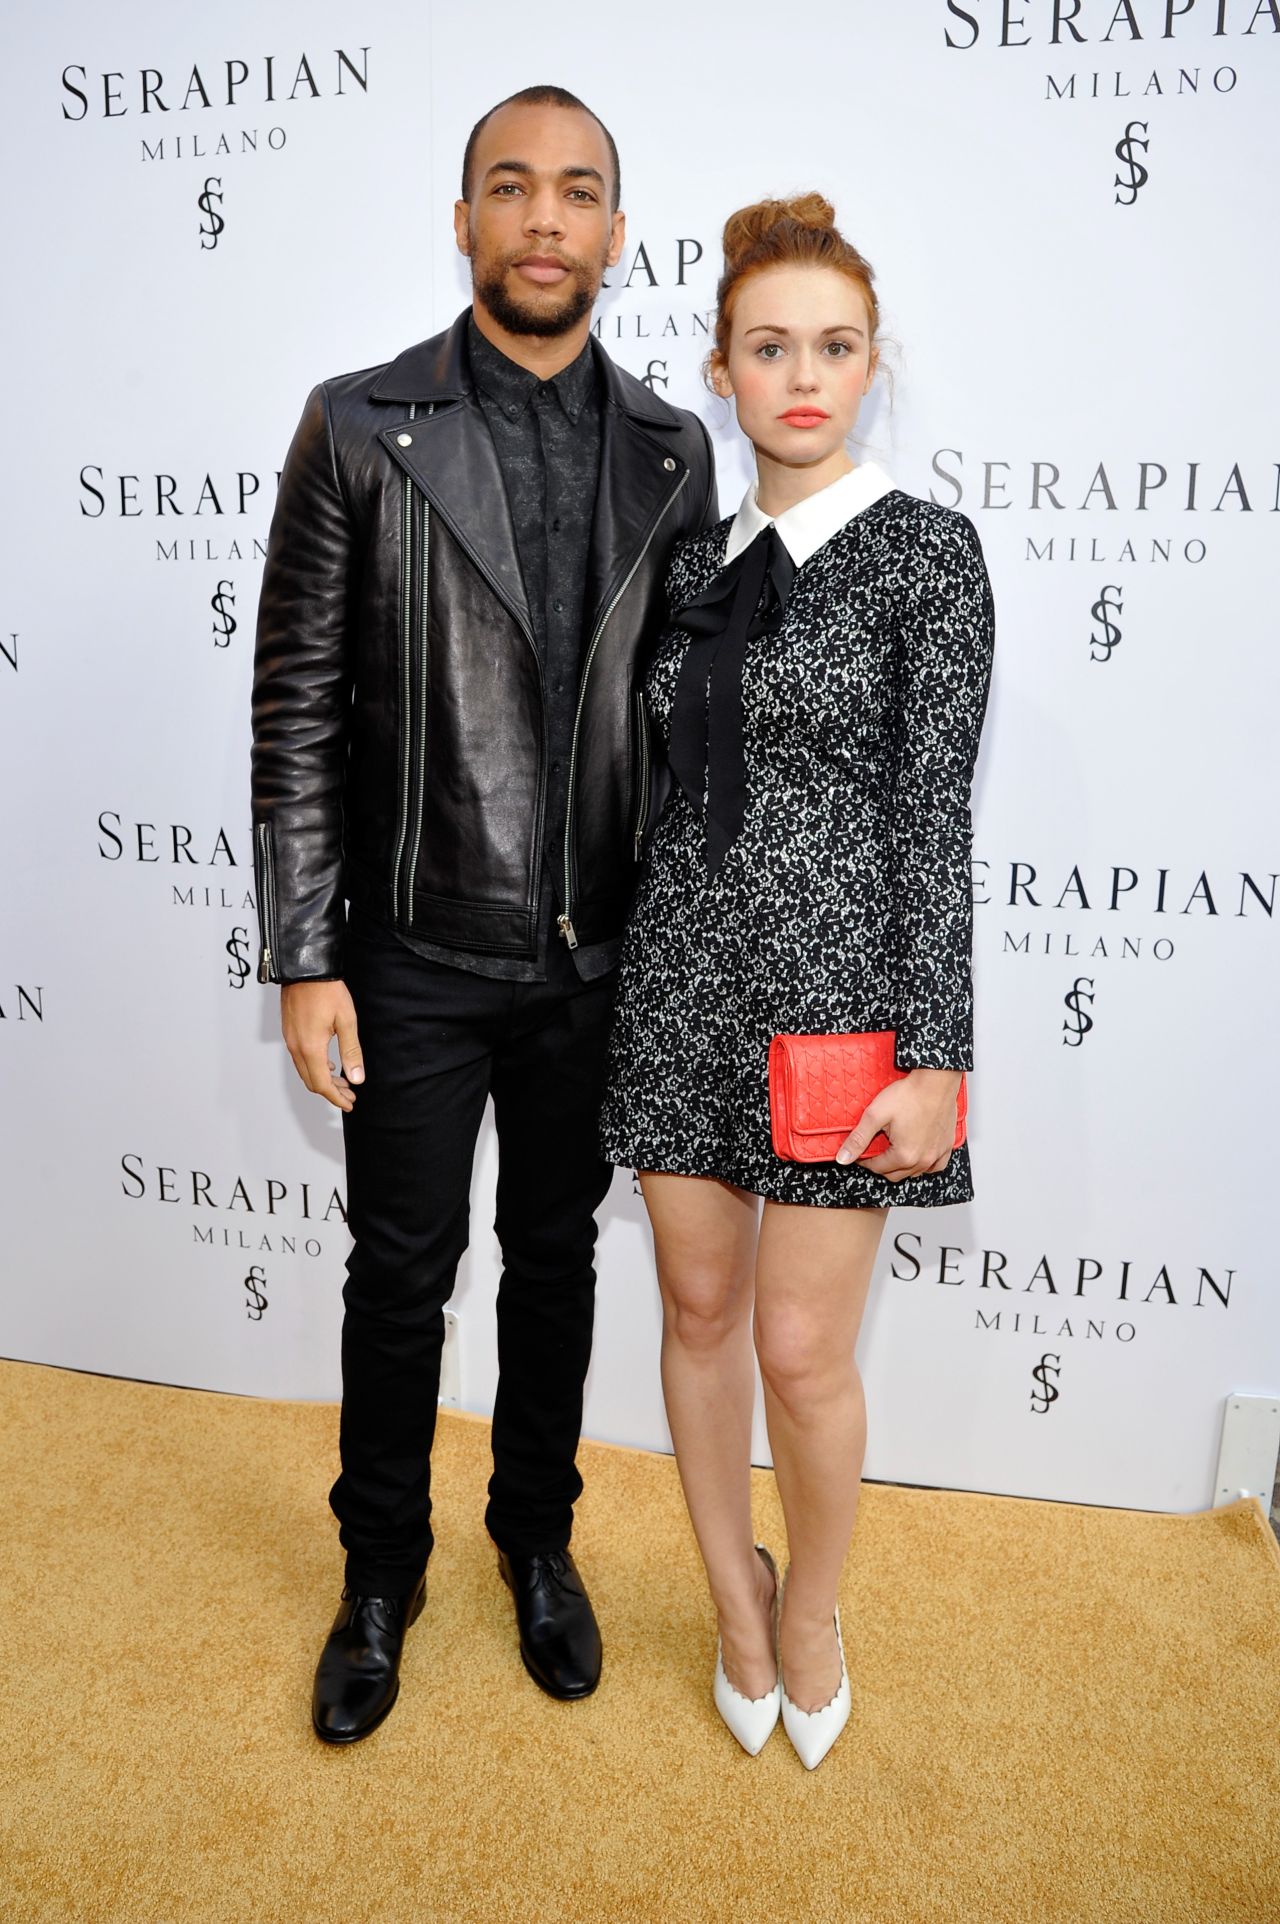 holland-roden-serapian-milano-opening-of-first-u.s.-retail-store-in-beverly-hills_5